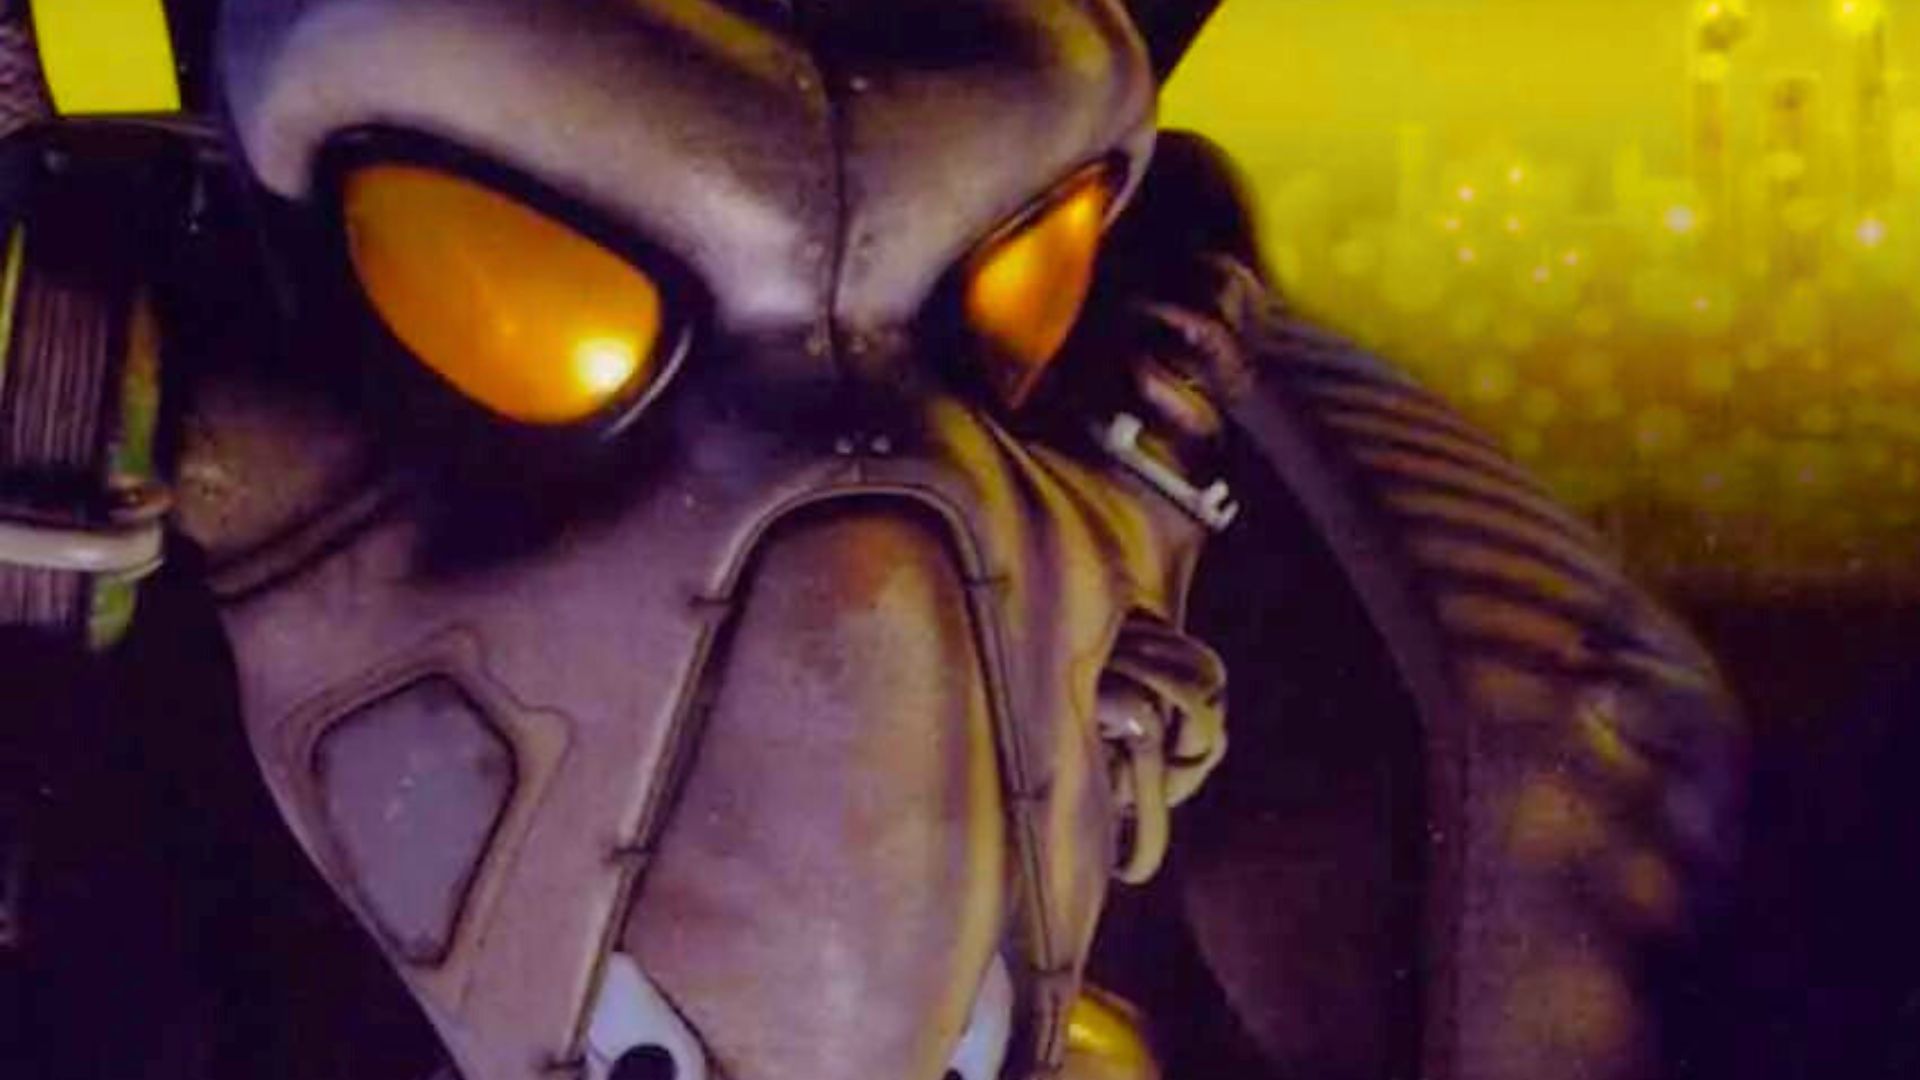 Incredible classic Fallout available as a free game for a limited time